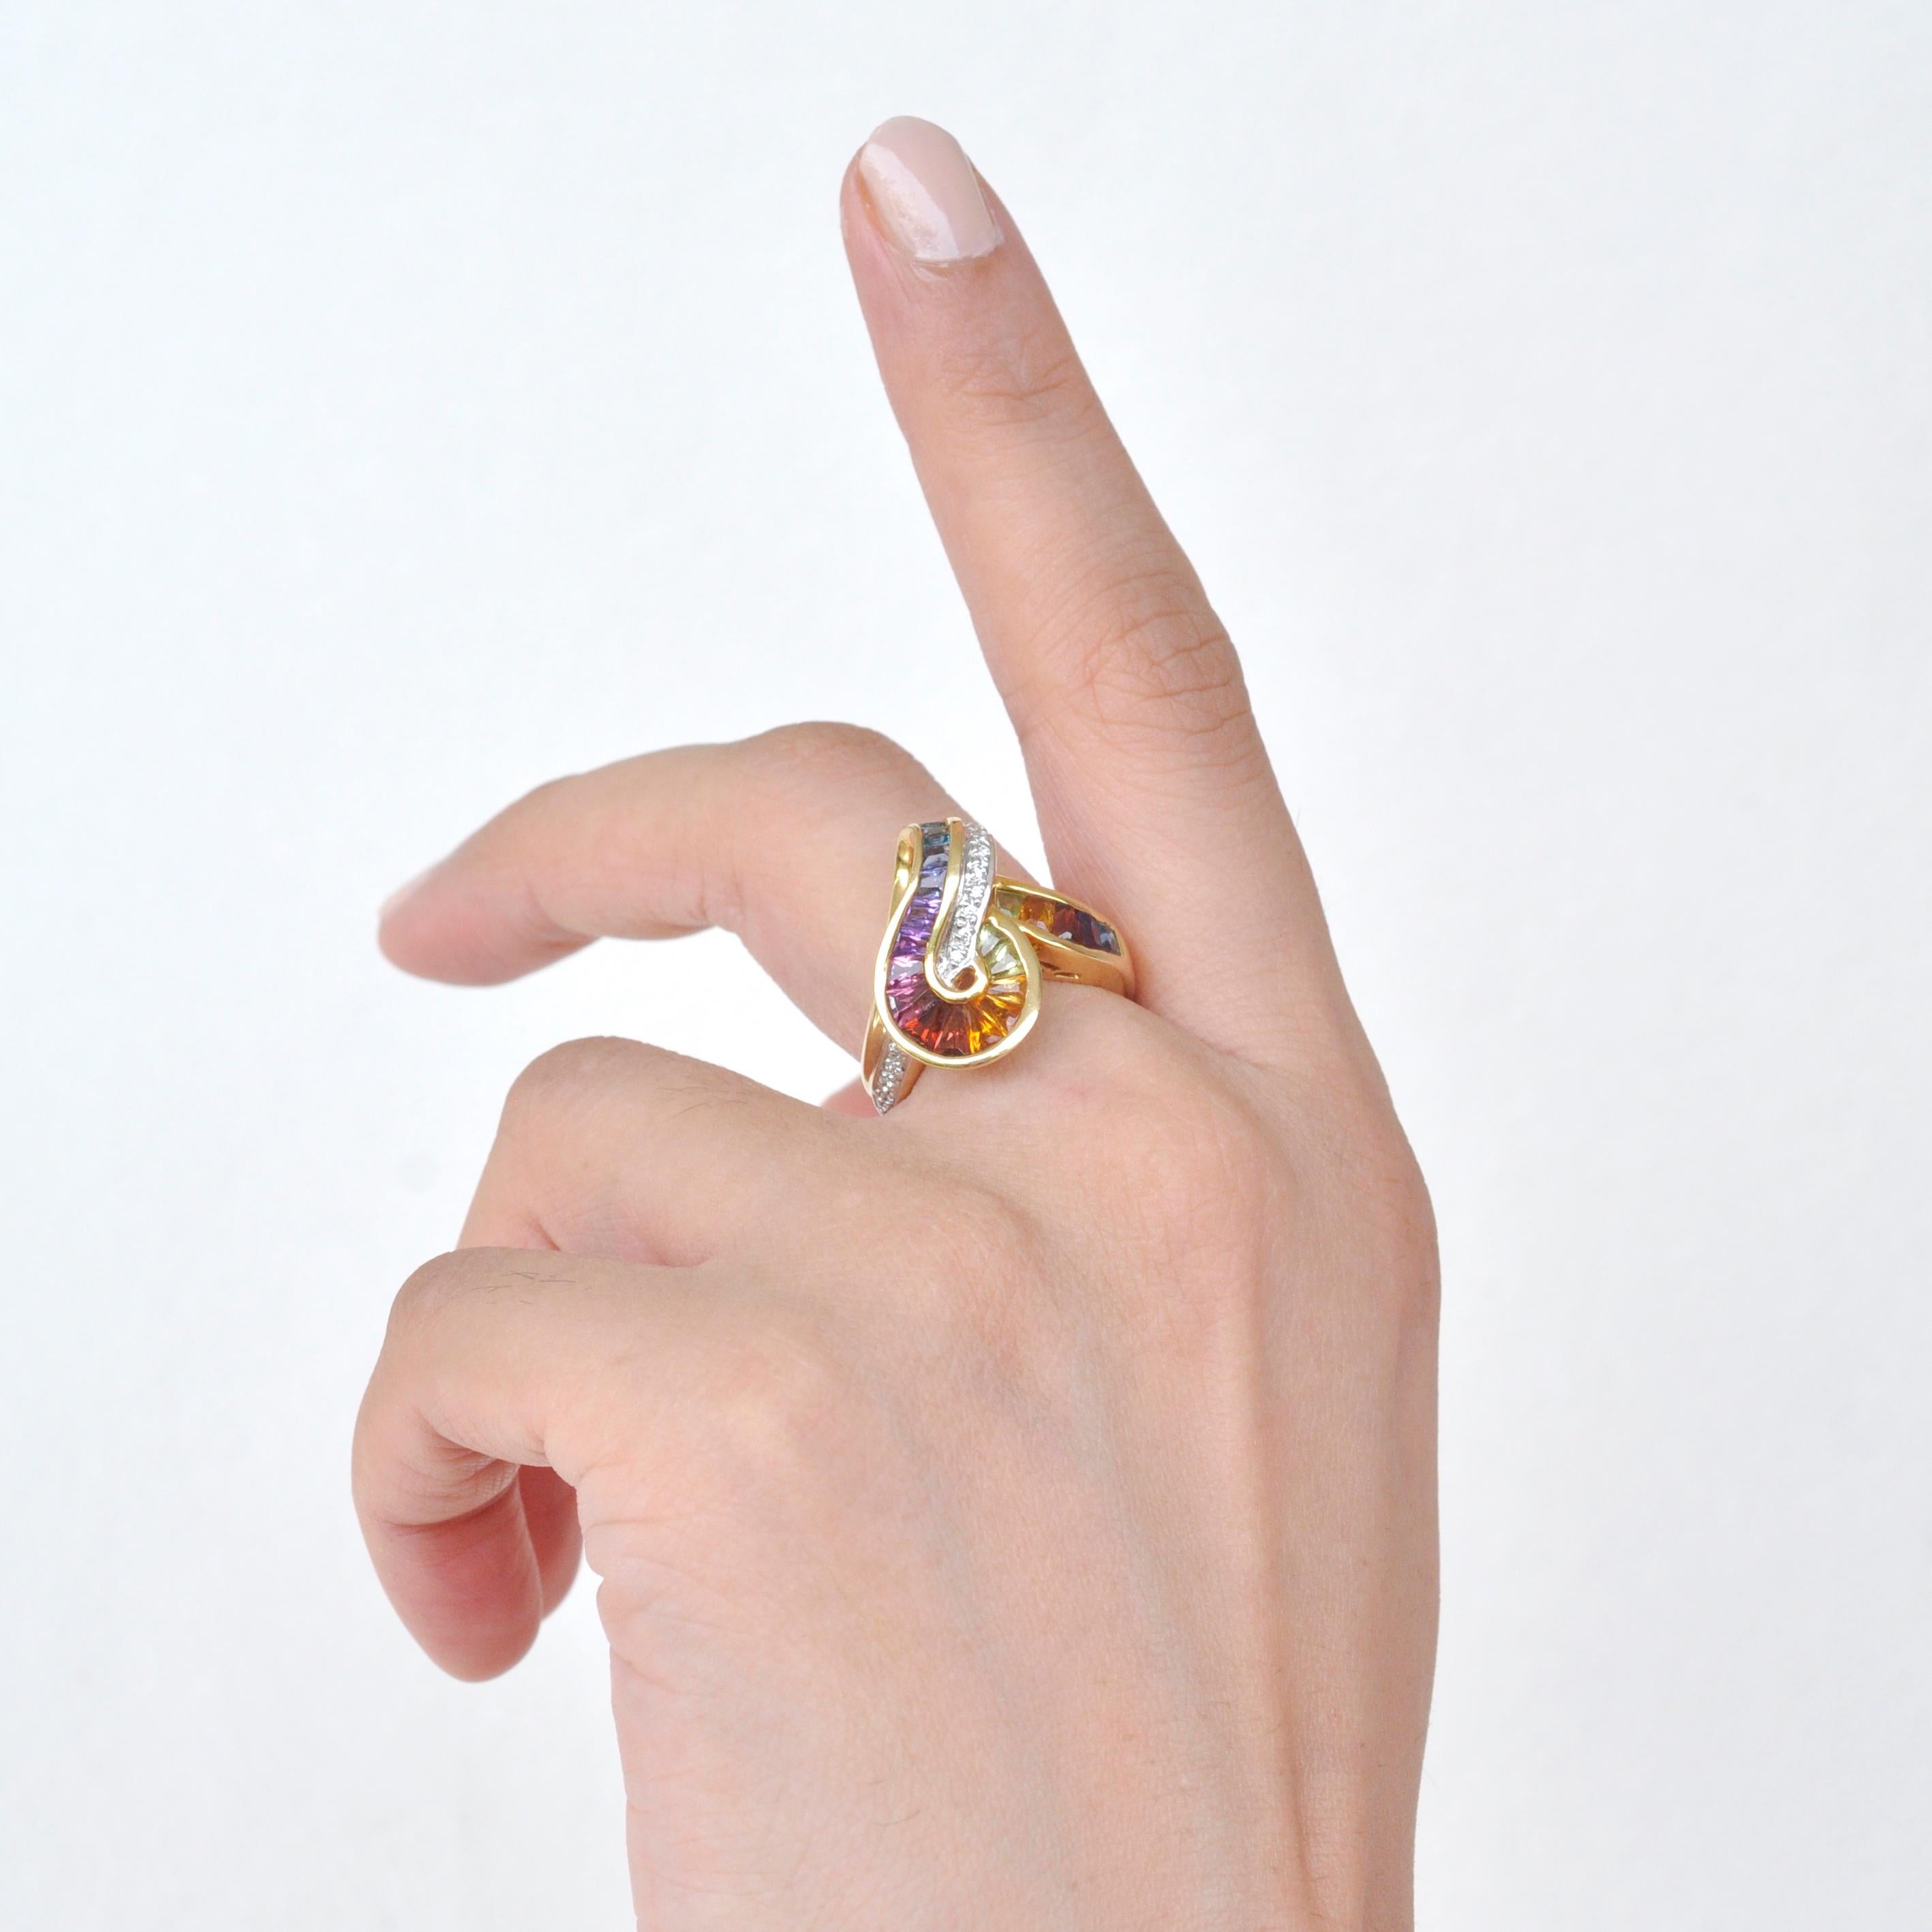 This swirl rainbow ring depicting an artful technique of tapering lustrous natural gemstones and channel setting it to perfectly meet the swirls of the design. A total of 3.96cts of natural gemstones like Amethyst, Garnet, Citrine, Peridot,